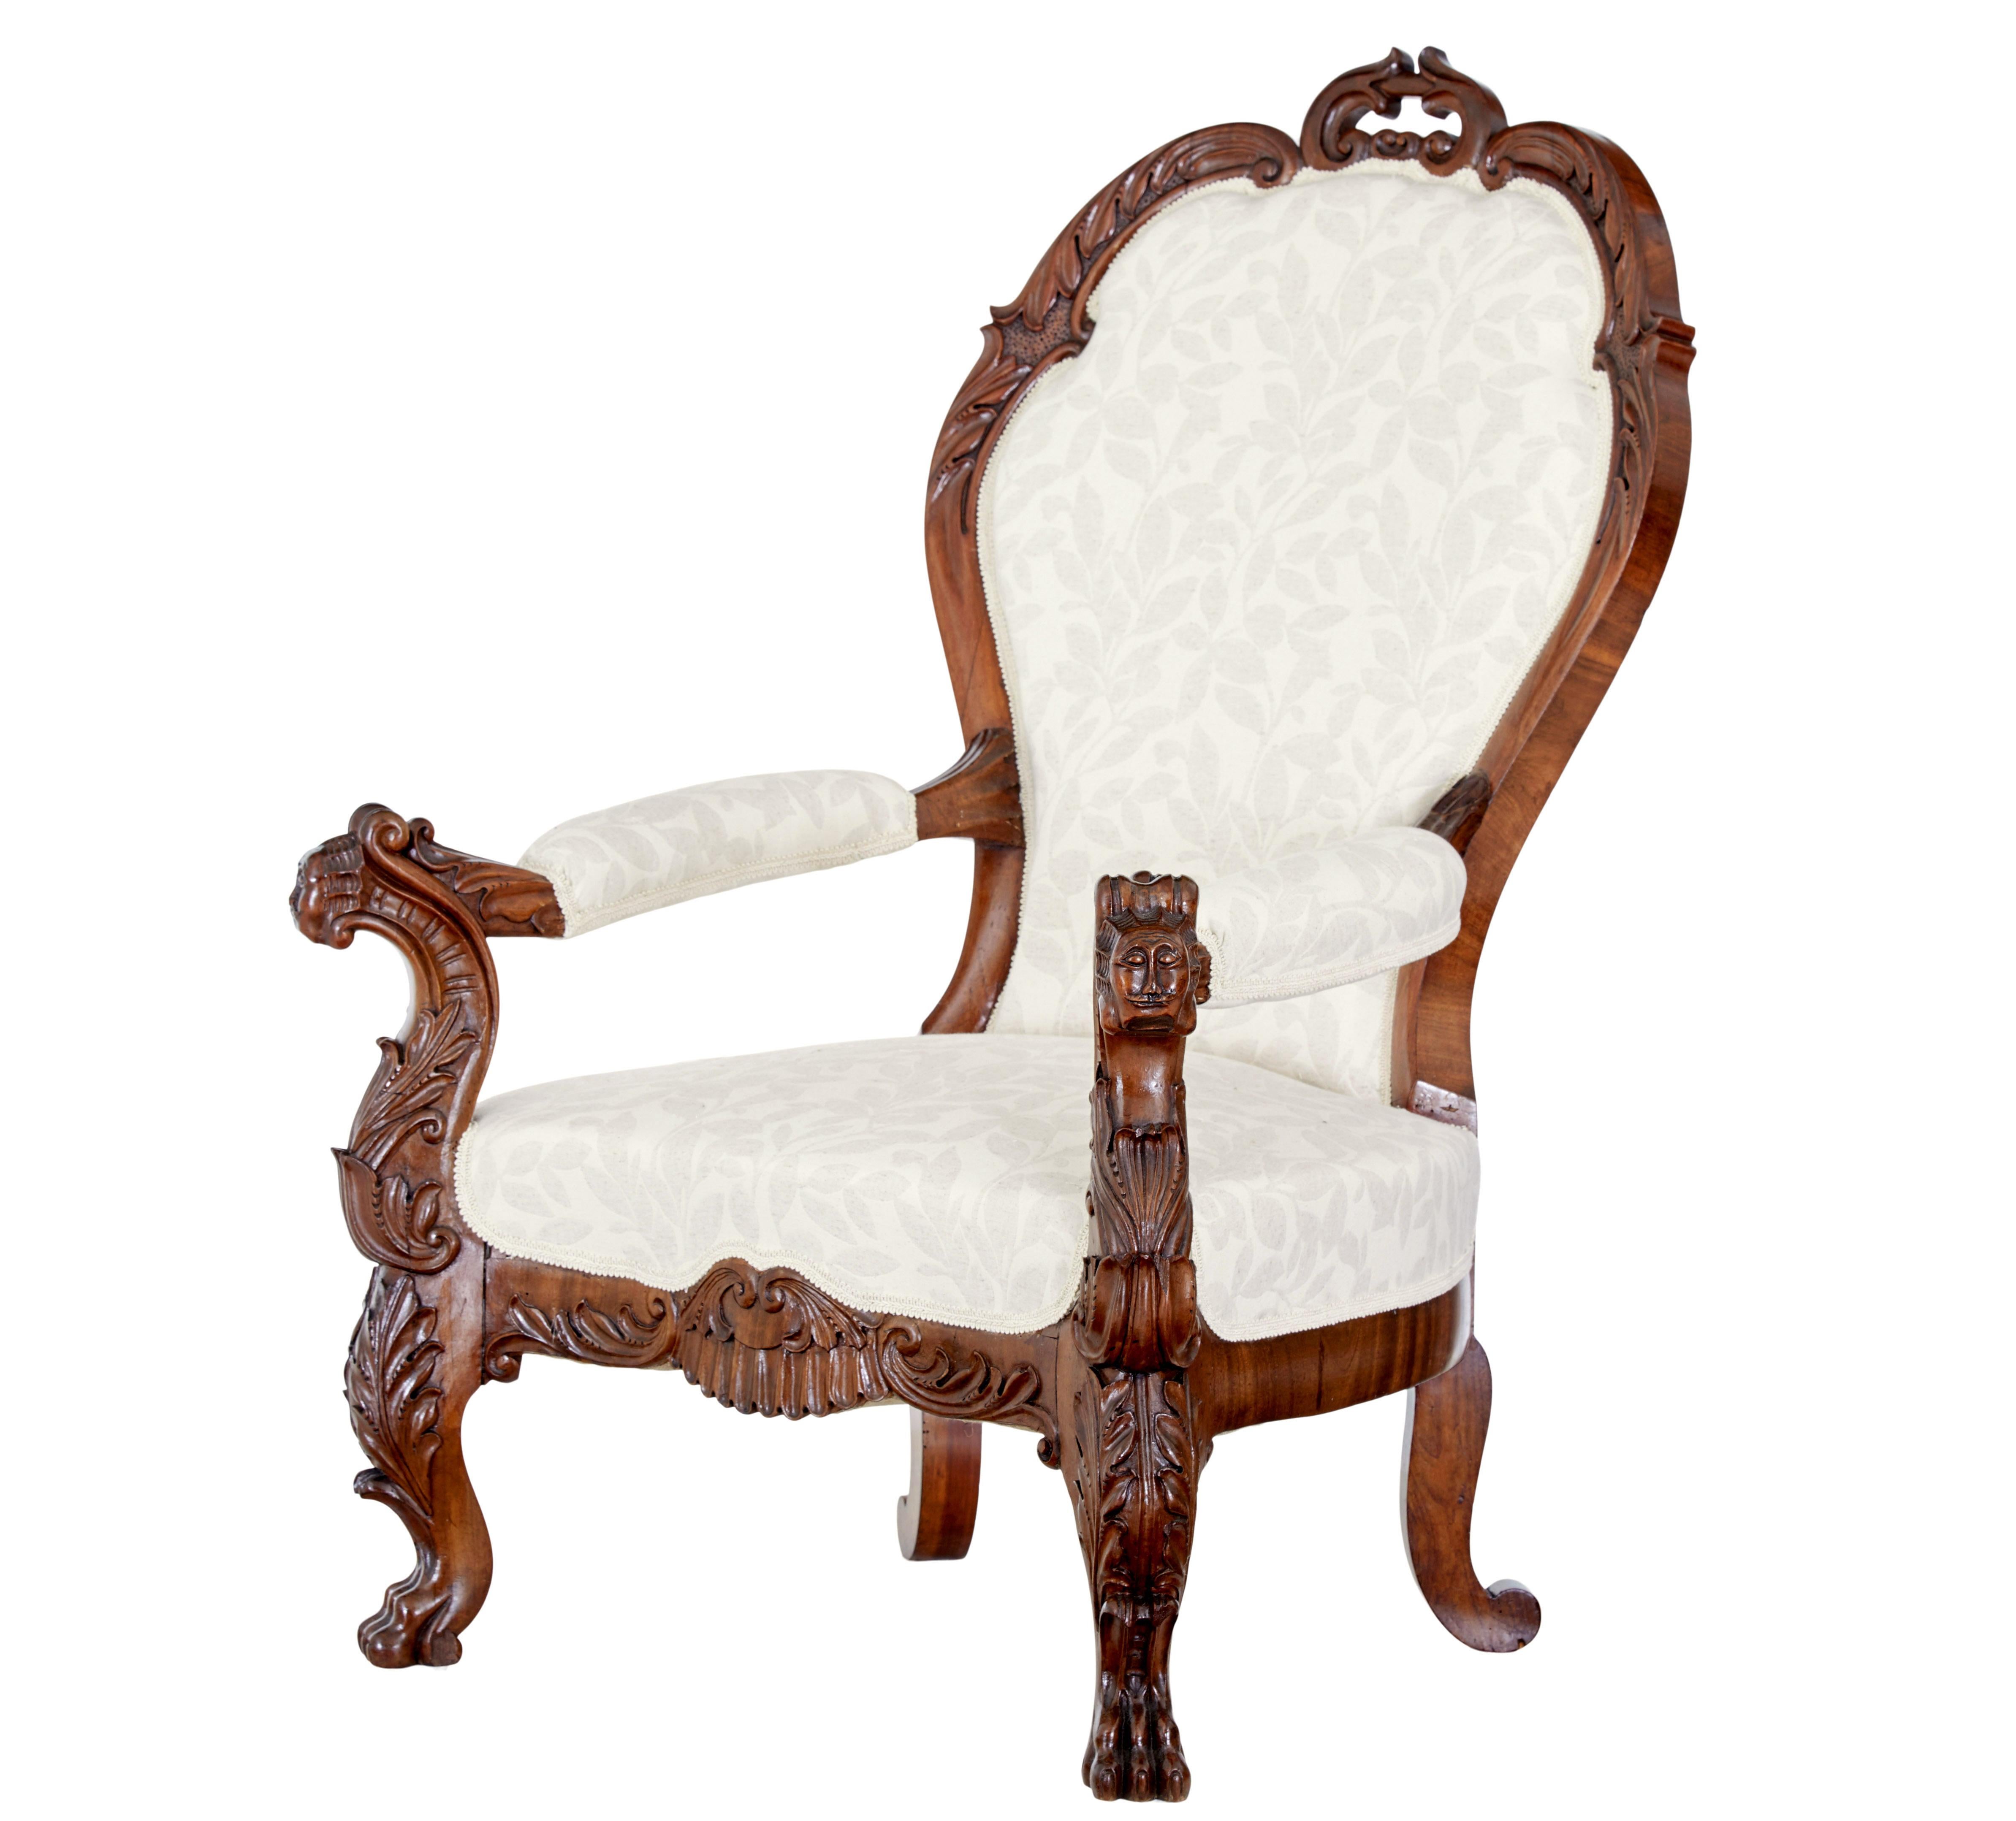 Carved Mid 19th century carved walnut armchair For Sale